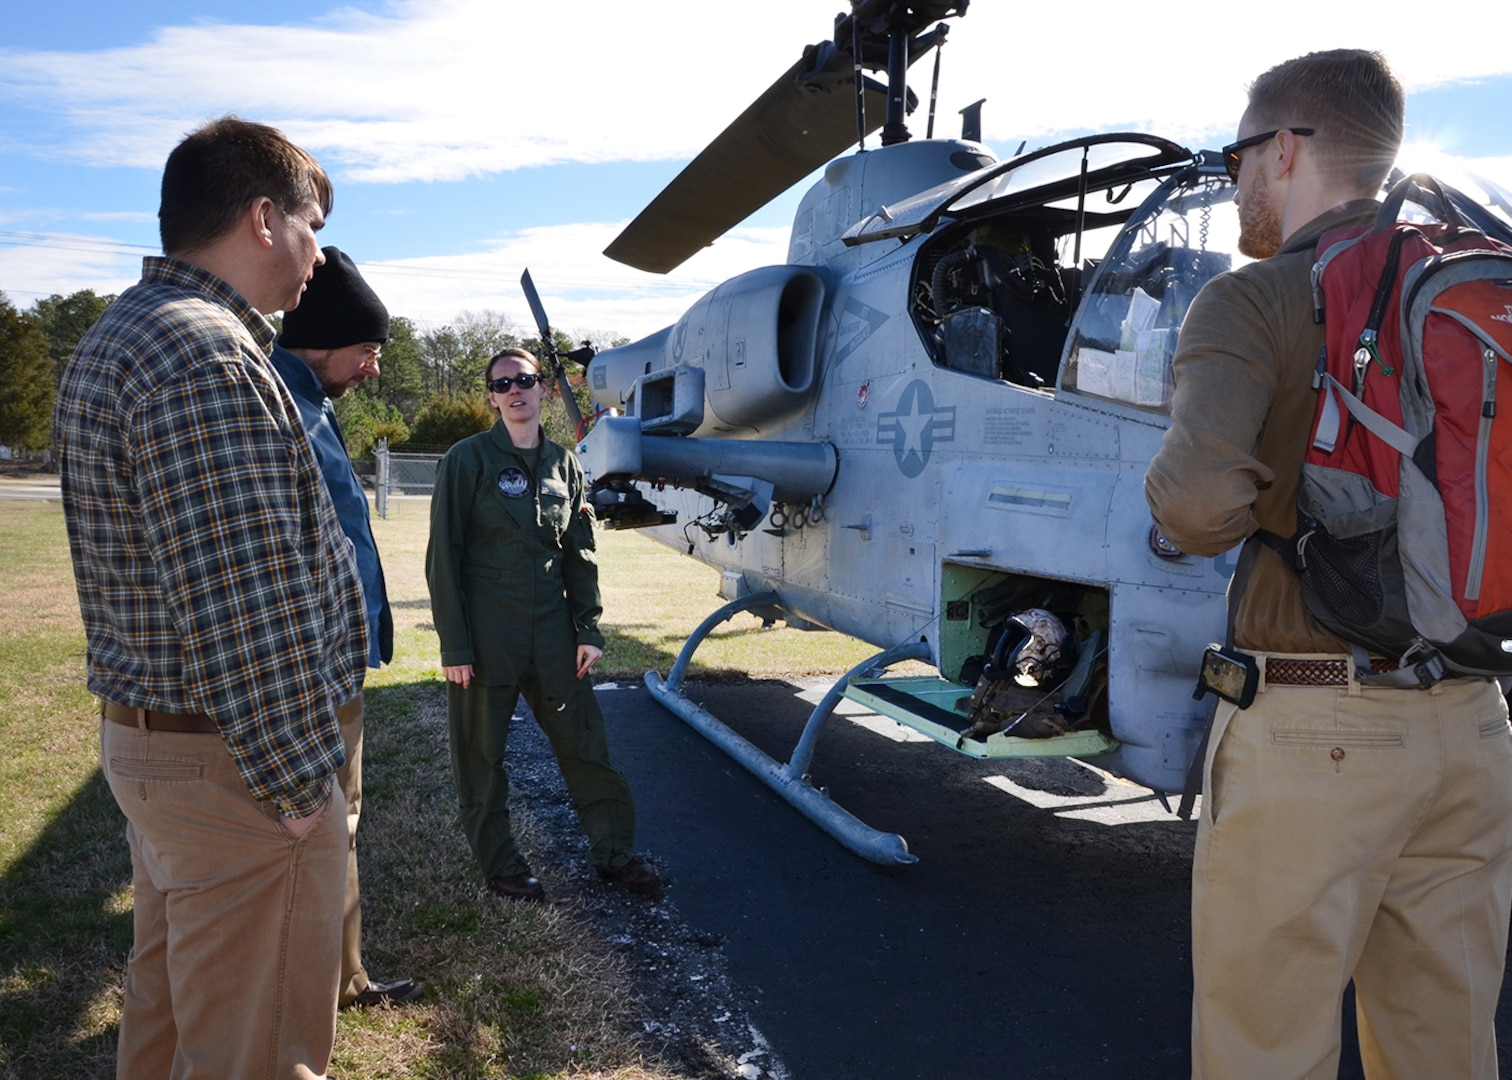 Marine Corps Capt. Pamela Whalen speaks with members of the Defense Logistics Agency Aviation team during a meet and greet March 8, 2017 at Defense Supply Center Richmond, Virginia. Whalen was a member of the flight crew for the AH-1W Cobra helicopter. (Photo by Jackie Roberts)